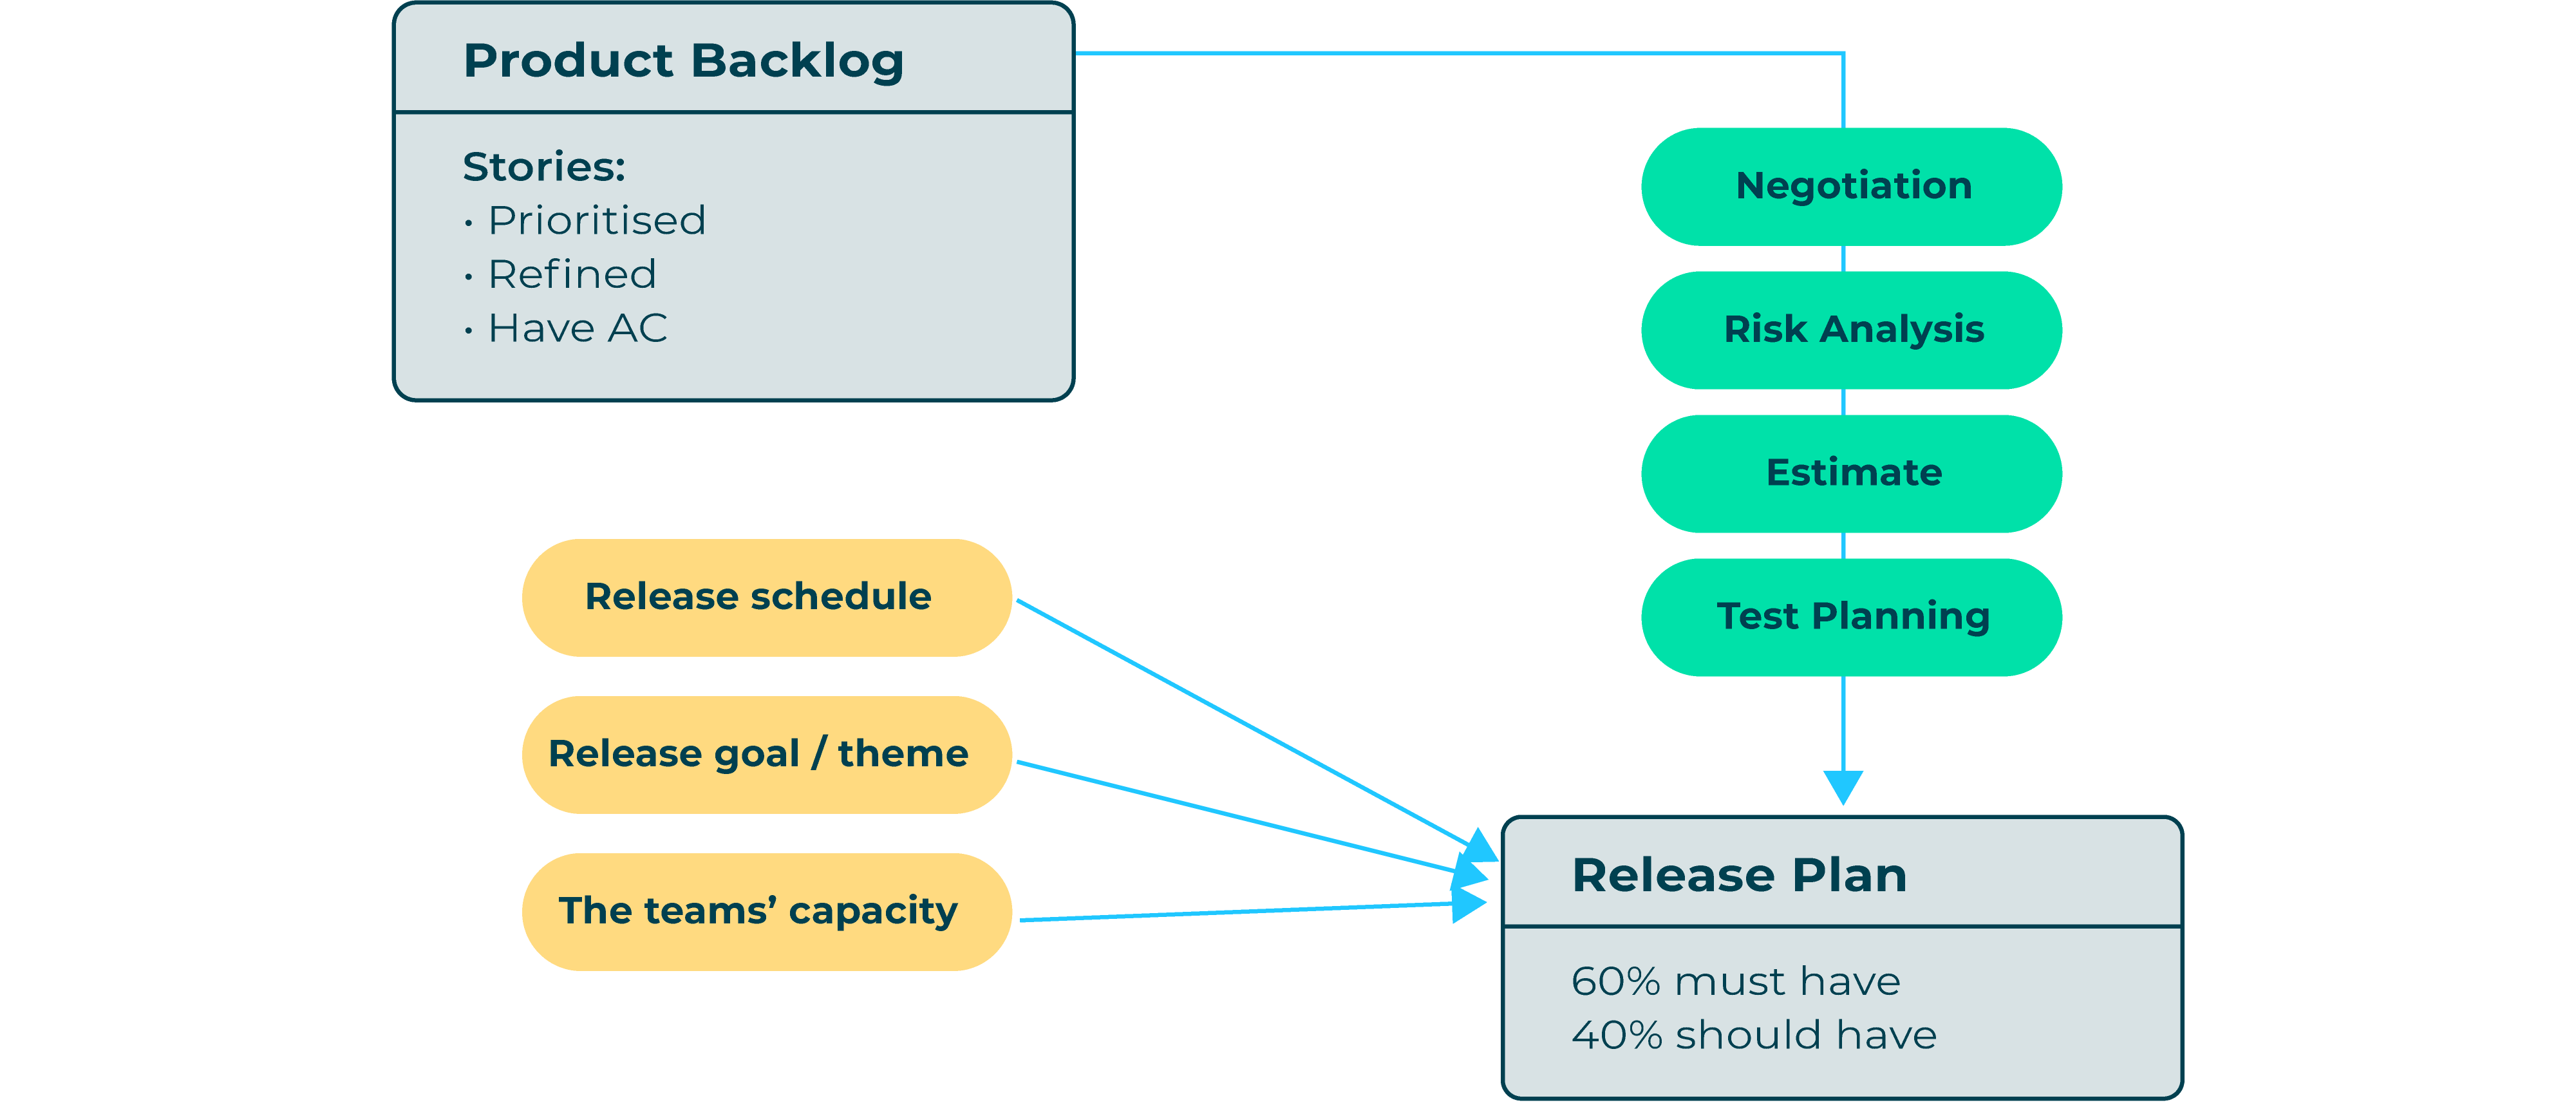 A diagram showing the product backlog feeding into the release plan, via negotiation, risk analysis, estimation, and test planning. The release plan is 60% must have and 40% should have, and the following three factors contributes to the plan: release schedule, release goal/theme, and the teams’ capacity.